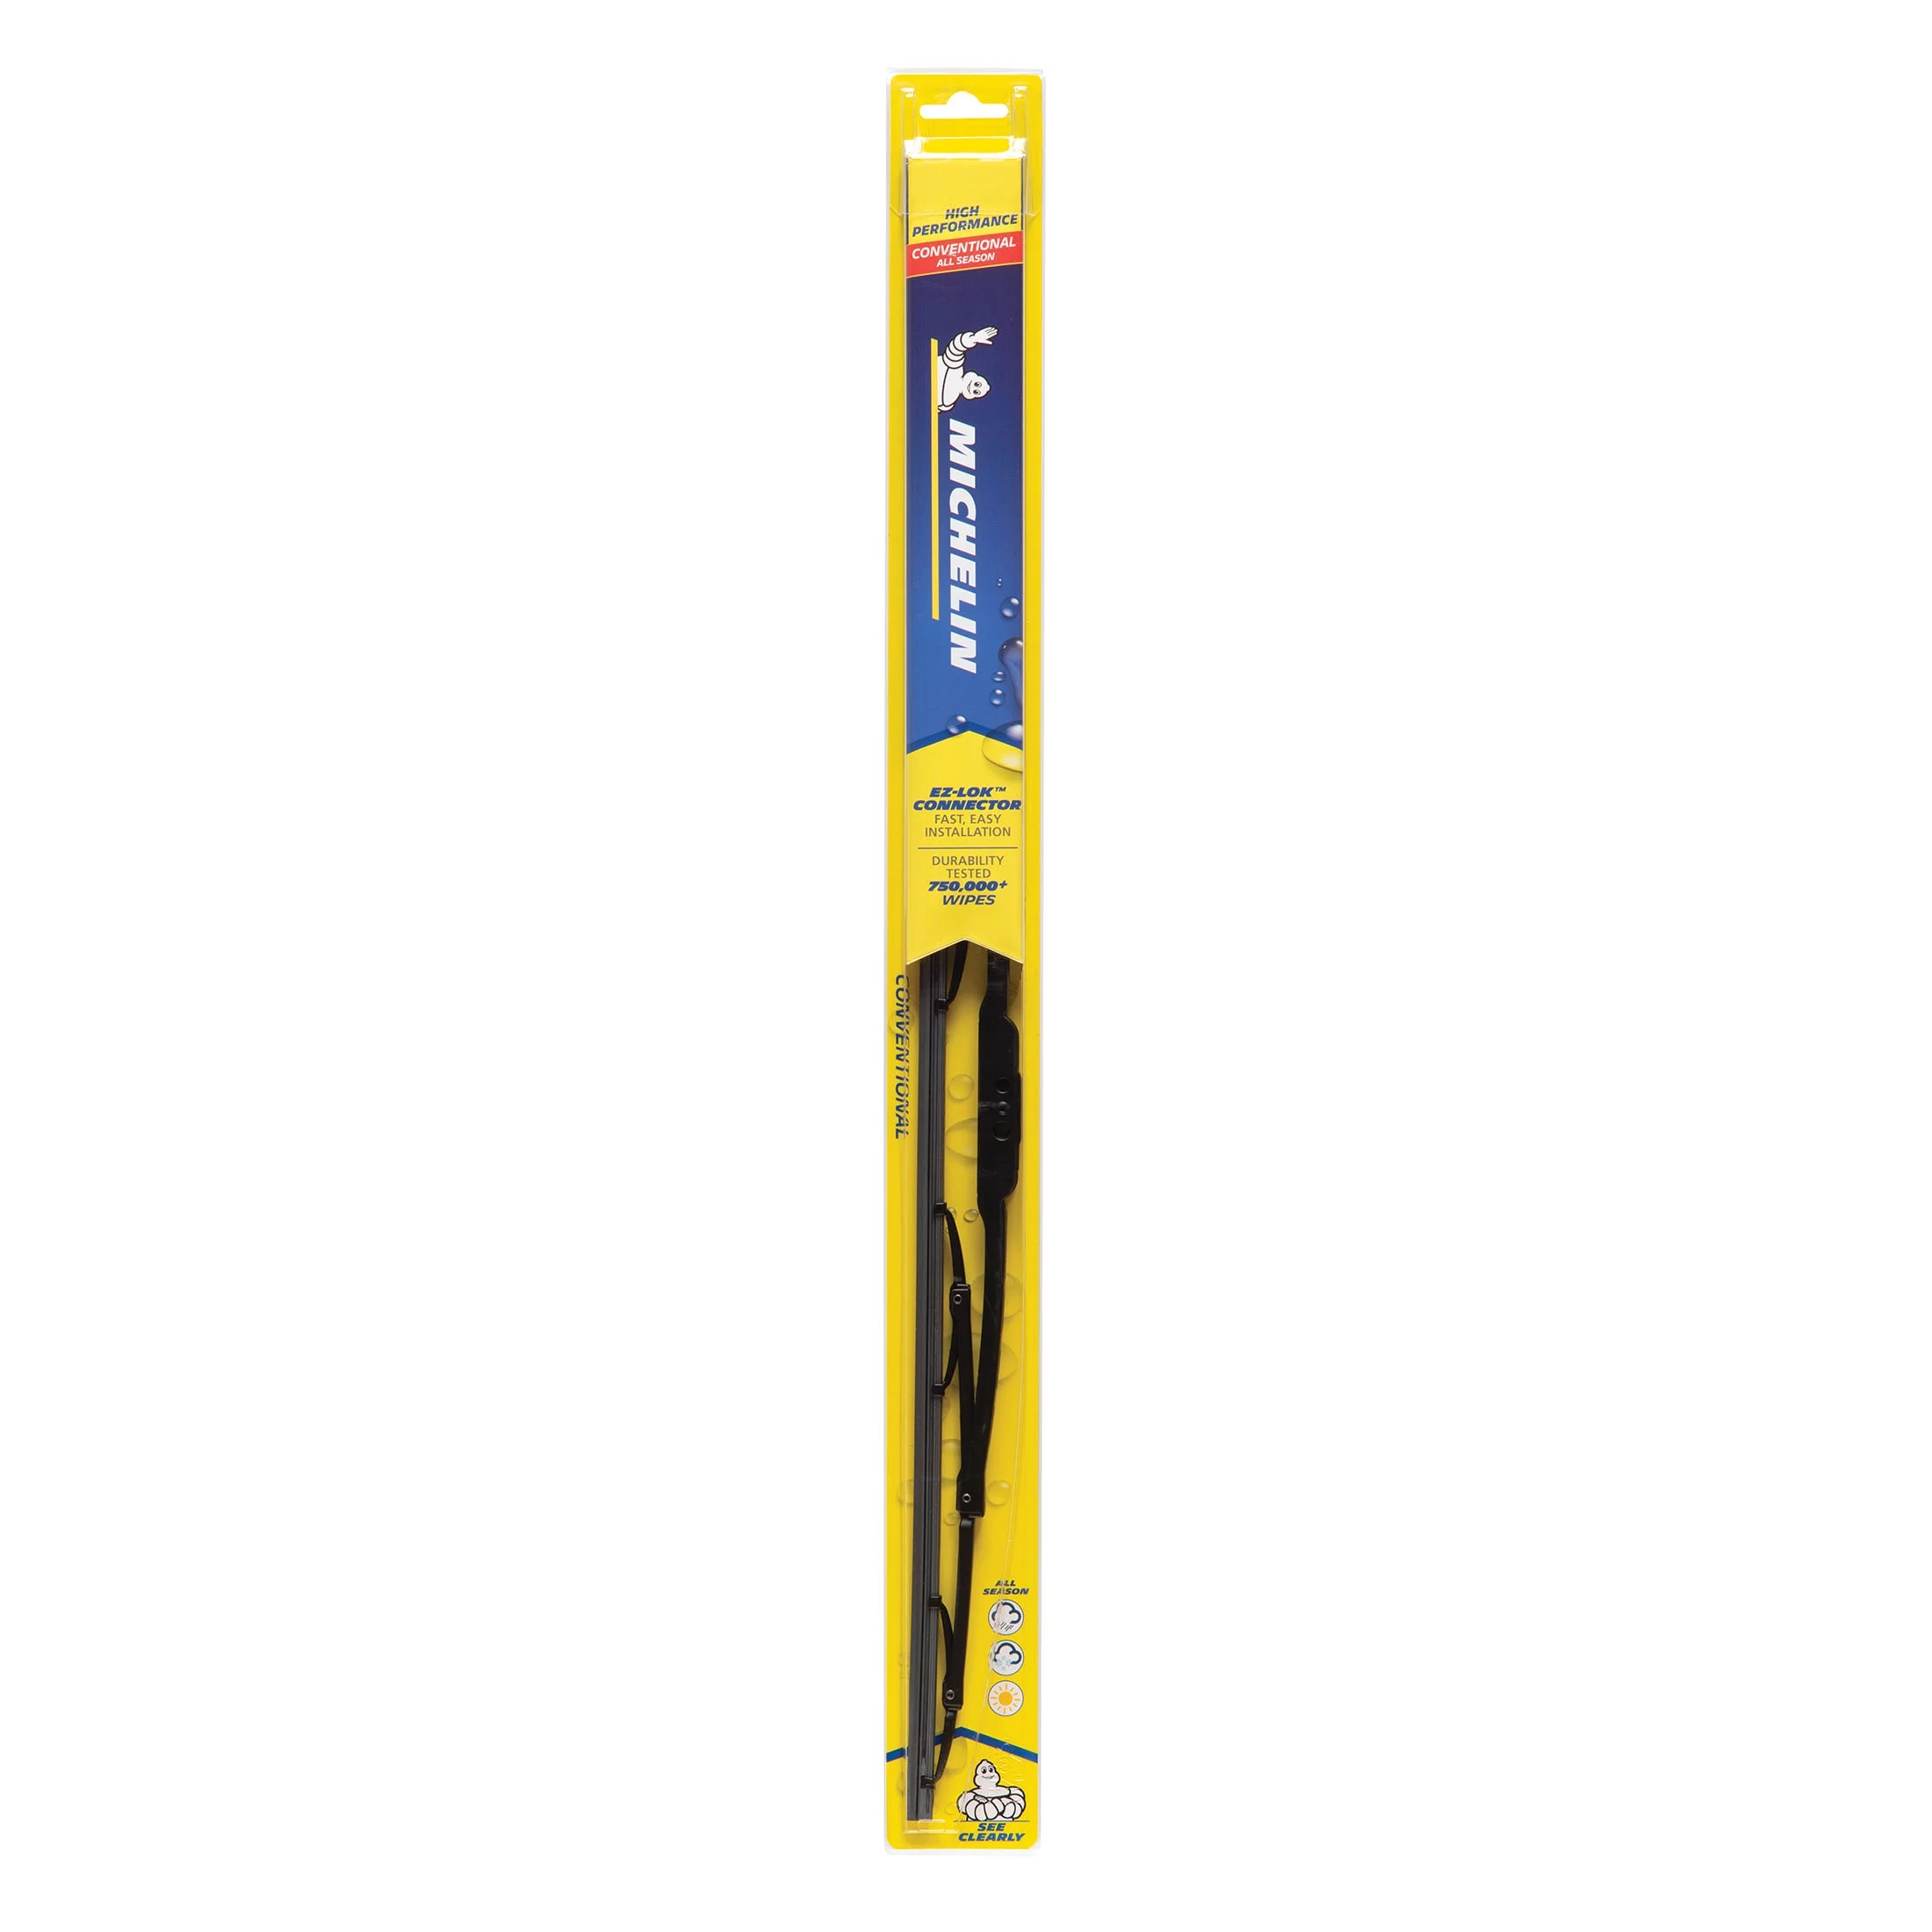 Michelin High Performance Conventional Windshield Wiper Blade, 22"